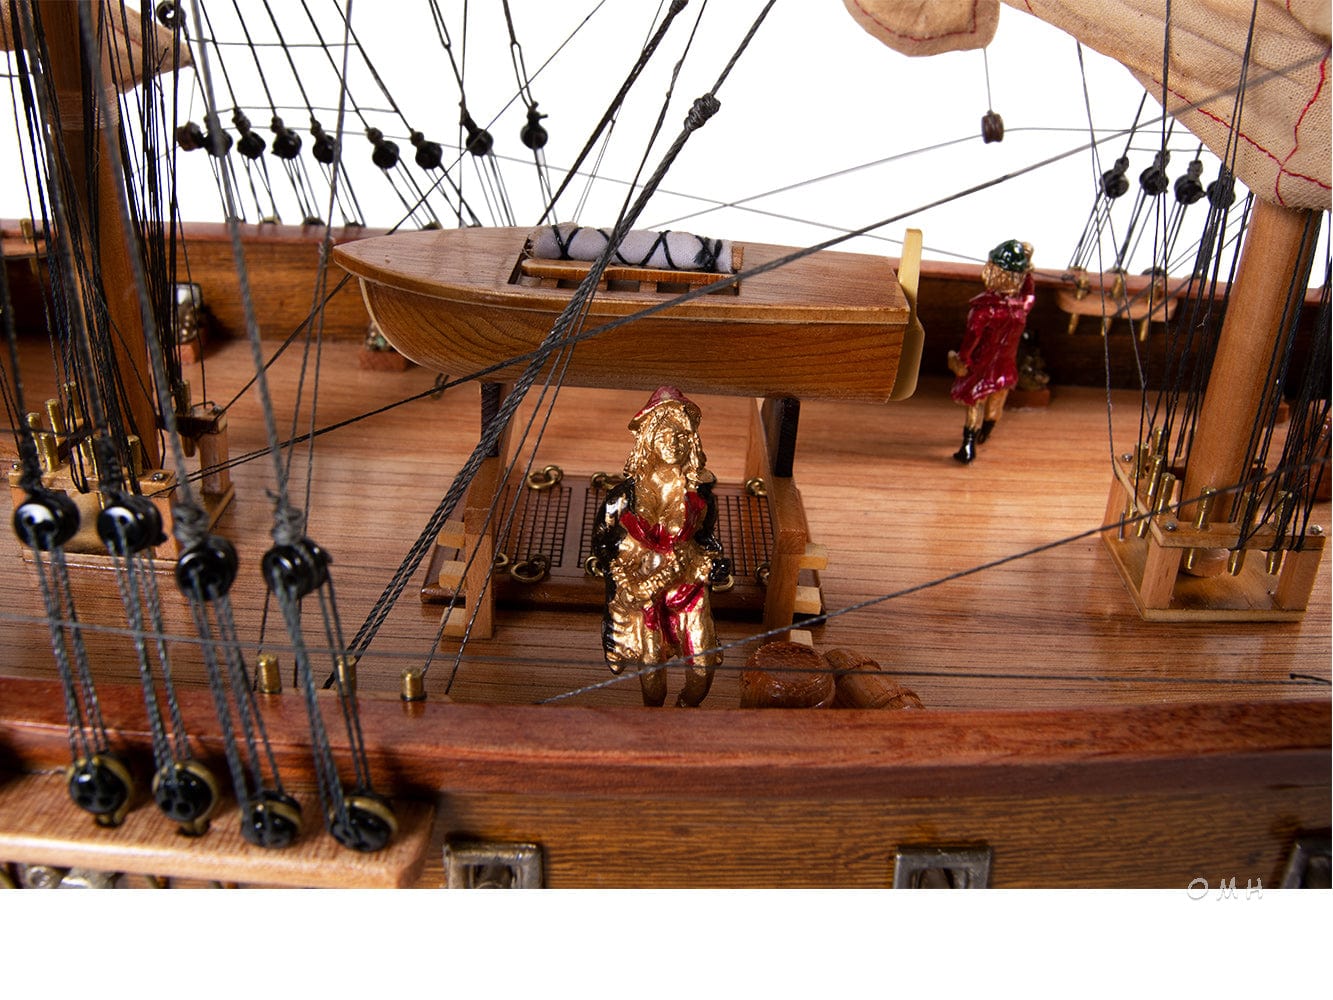 ALDO Creative Arts Collectibles Scale Model Pirate Ship Exclusive Edition Sailboat Wood Model Assembled